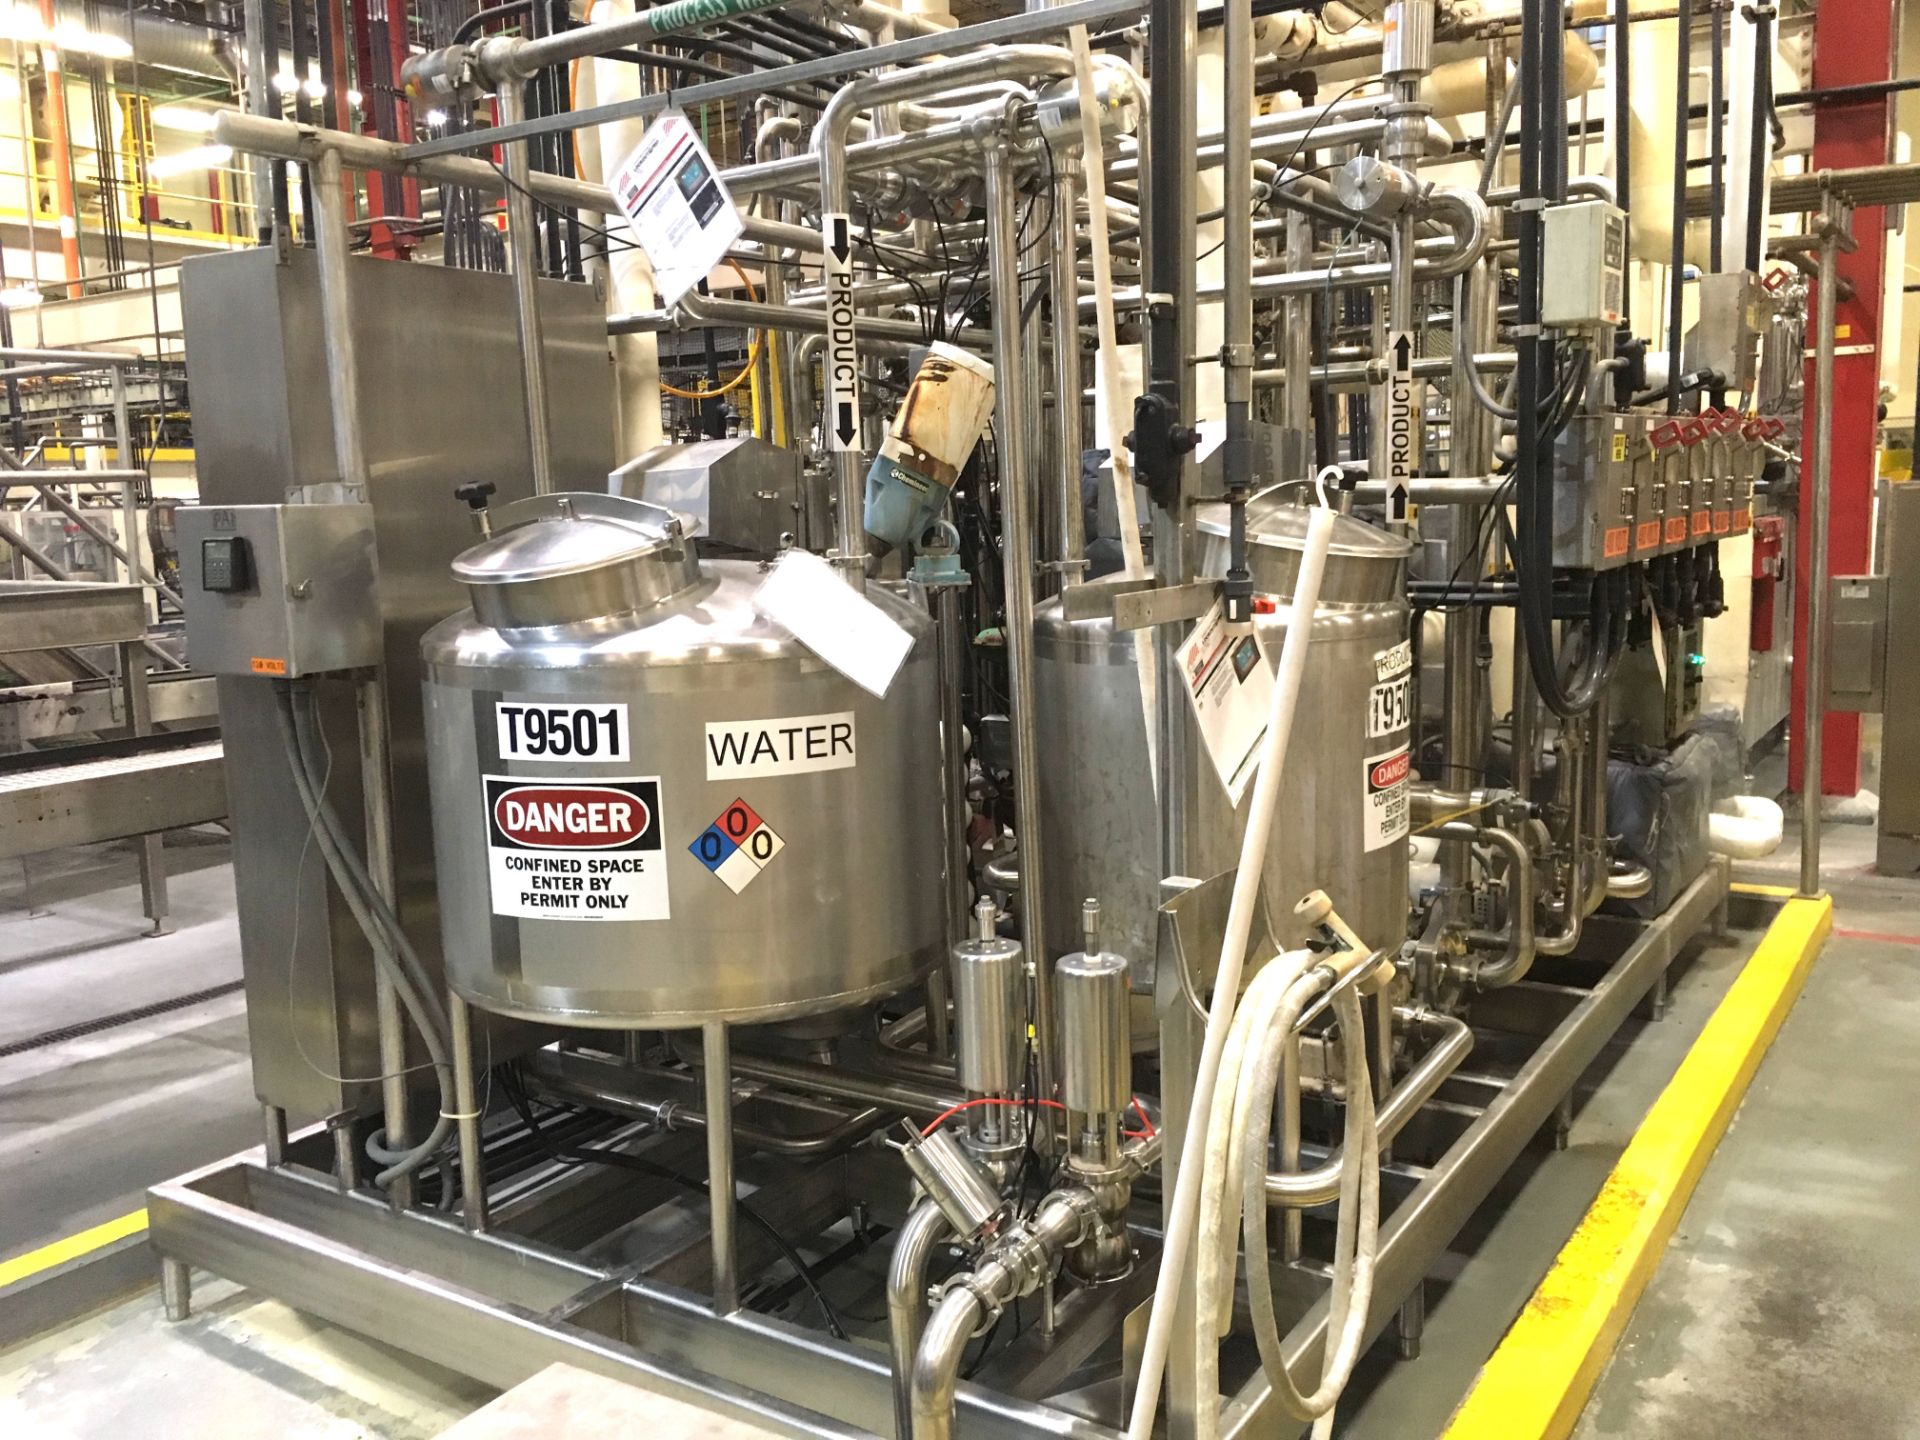 Skid Mounted HTST Pasteurization System for Hot Fill, Setup for Juice at 25 gallons per minute at - Image 12 of 14